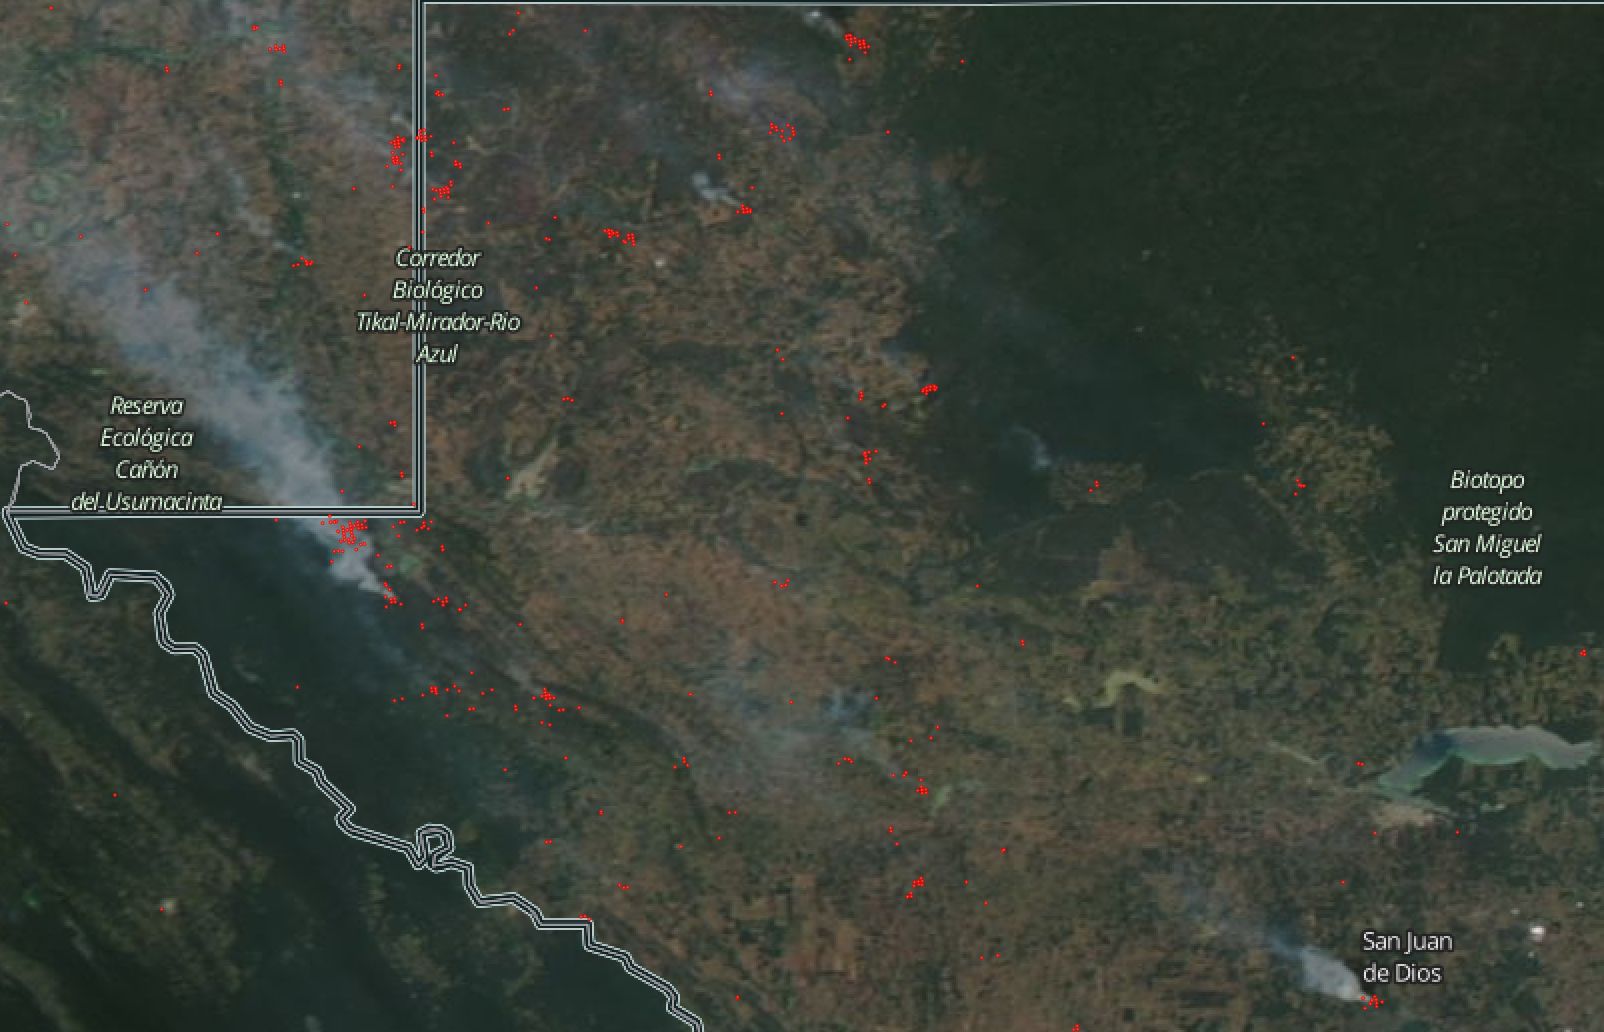 Image showing smoke streaming from wildfires in Guatemala